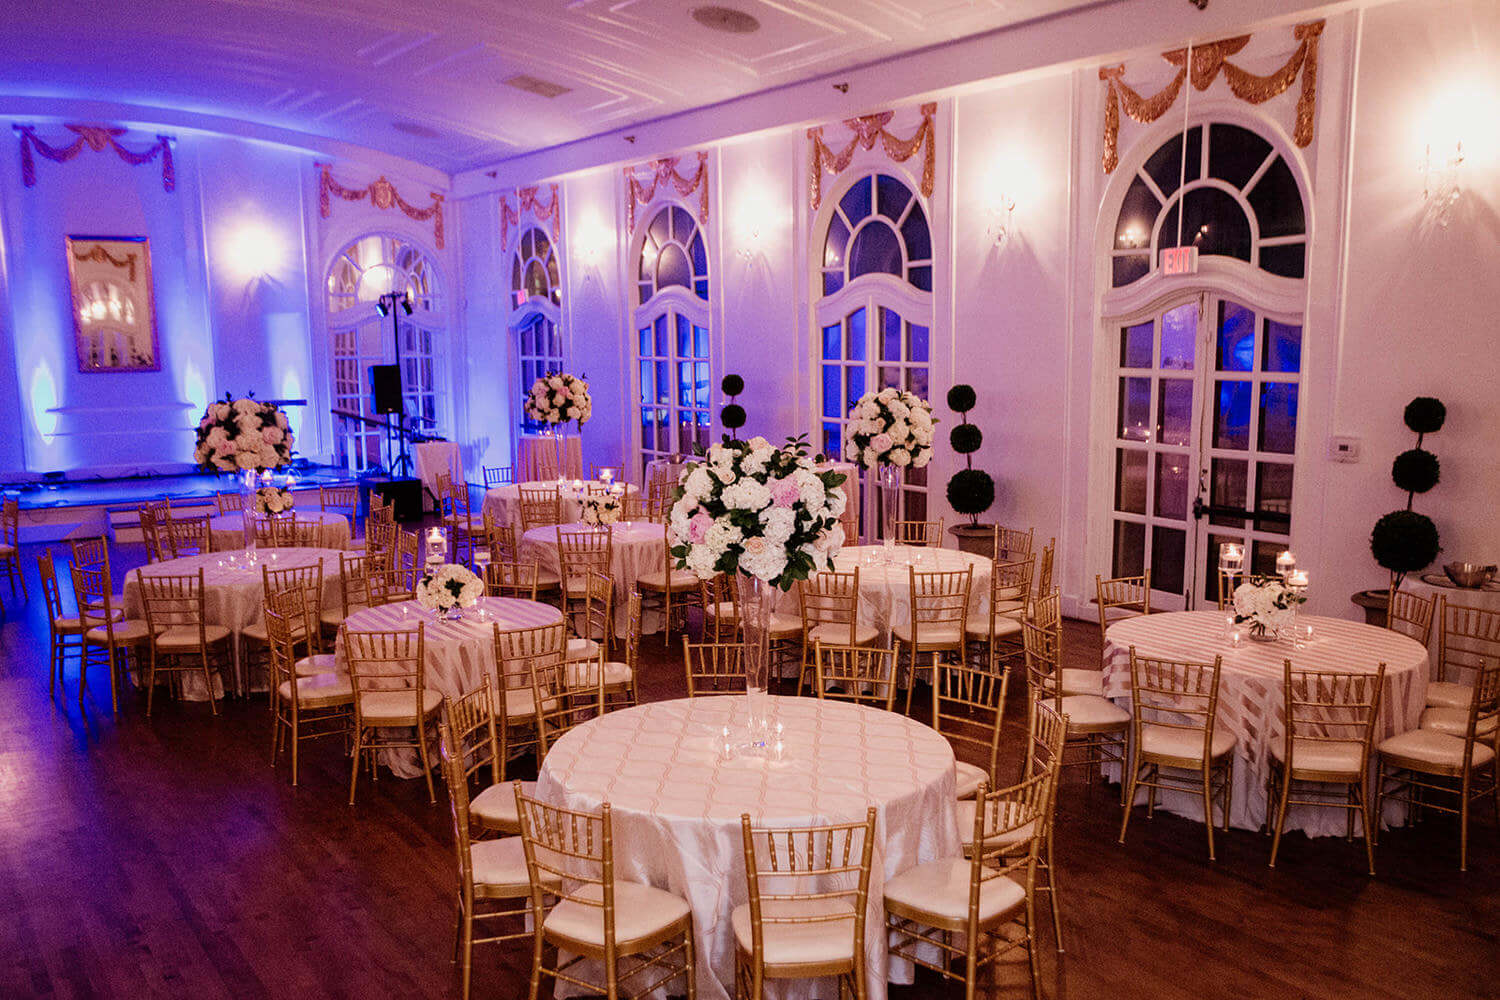 The reception took place at The Wimbish House